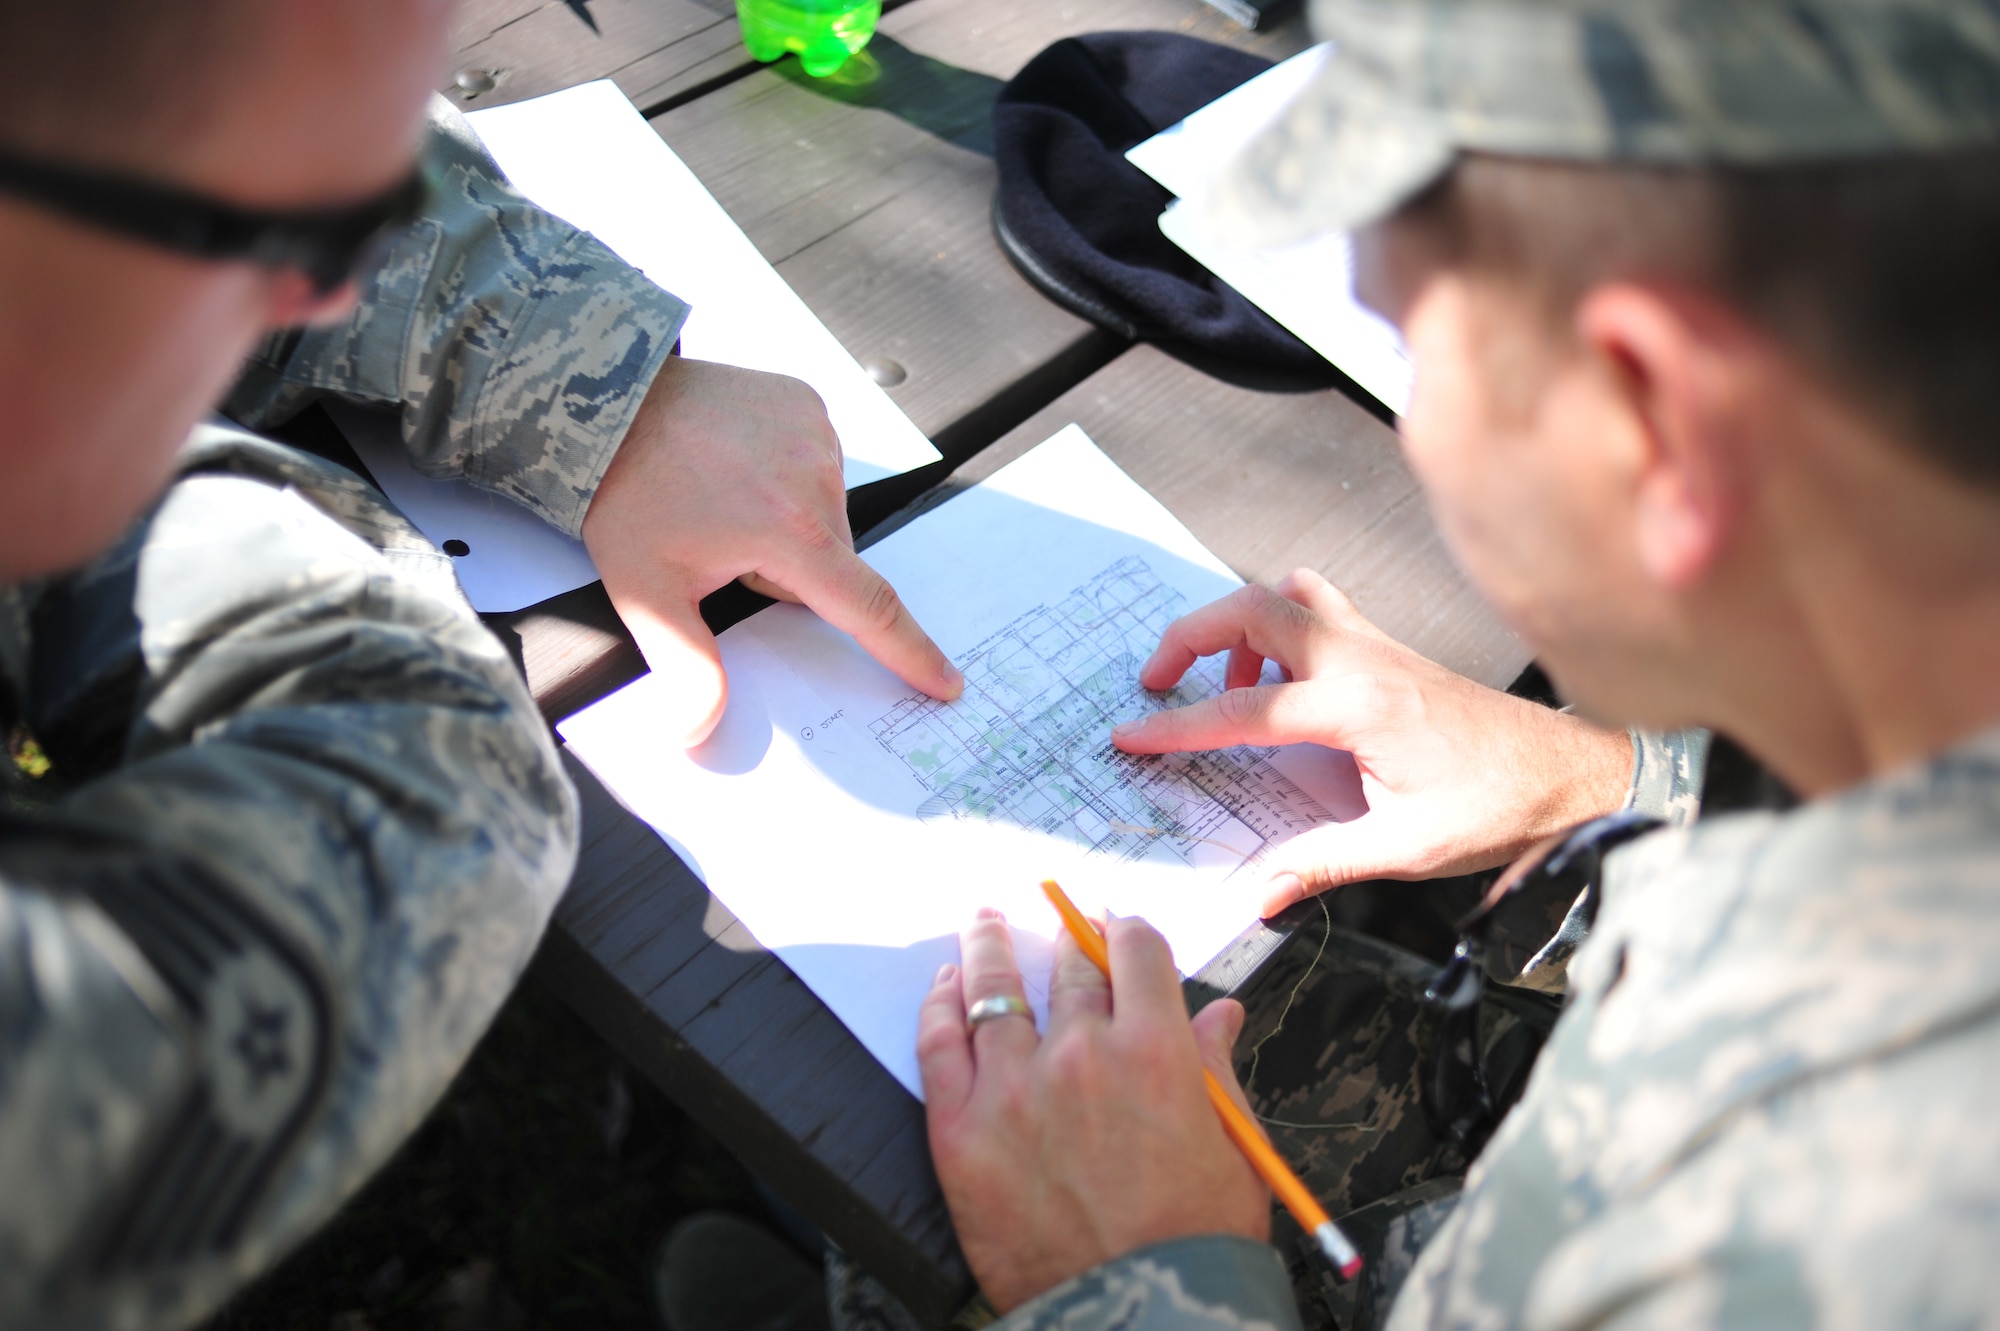 Security Forces Airmen of the 180th Fighter Wing prepare to start a land navigation course by examining a map grid at Oak Openings Metro Park in Swanton, Ohio on Sep. 27, 2015. The 180th Security Forces Squadron used old-school navigations tools, such as a compass and map, to maneuver a training course that prepares Airmen for scenarios when advanced technology may fail and leave them to rely only on the most basic resources. (Ohio Air National Guard photo by Staff Sgt. John Wilkes)